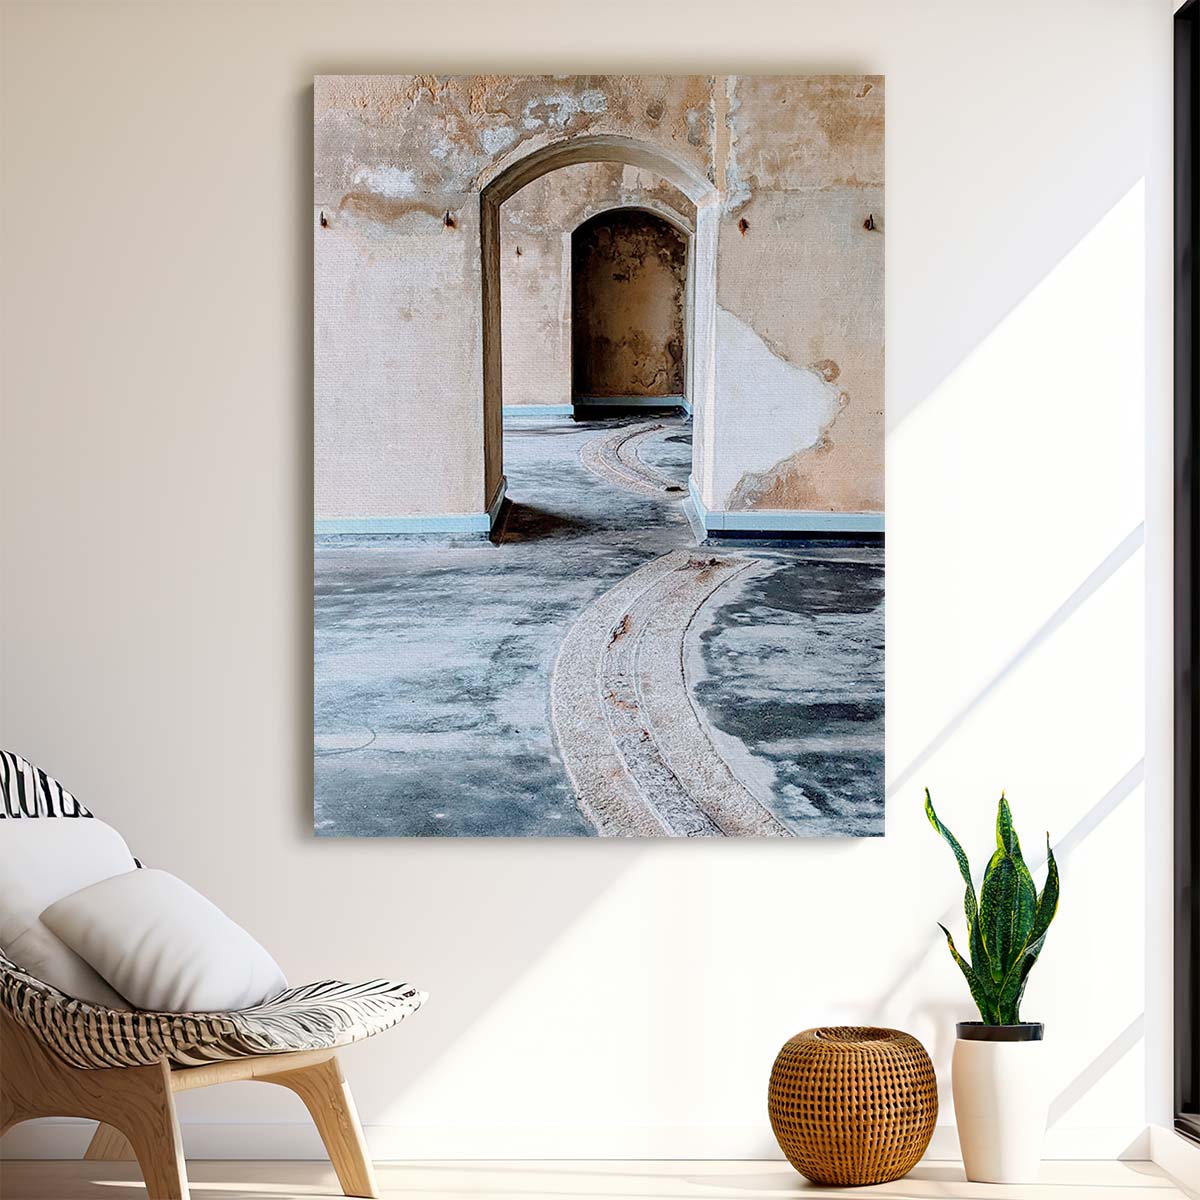 Abandoned Portsmouth Architectural Photography Interior Archways Wall Art by Luxuriance Designs, made in USA